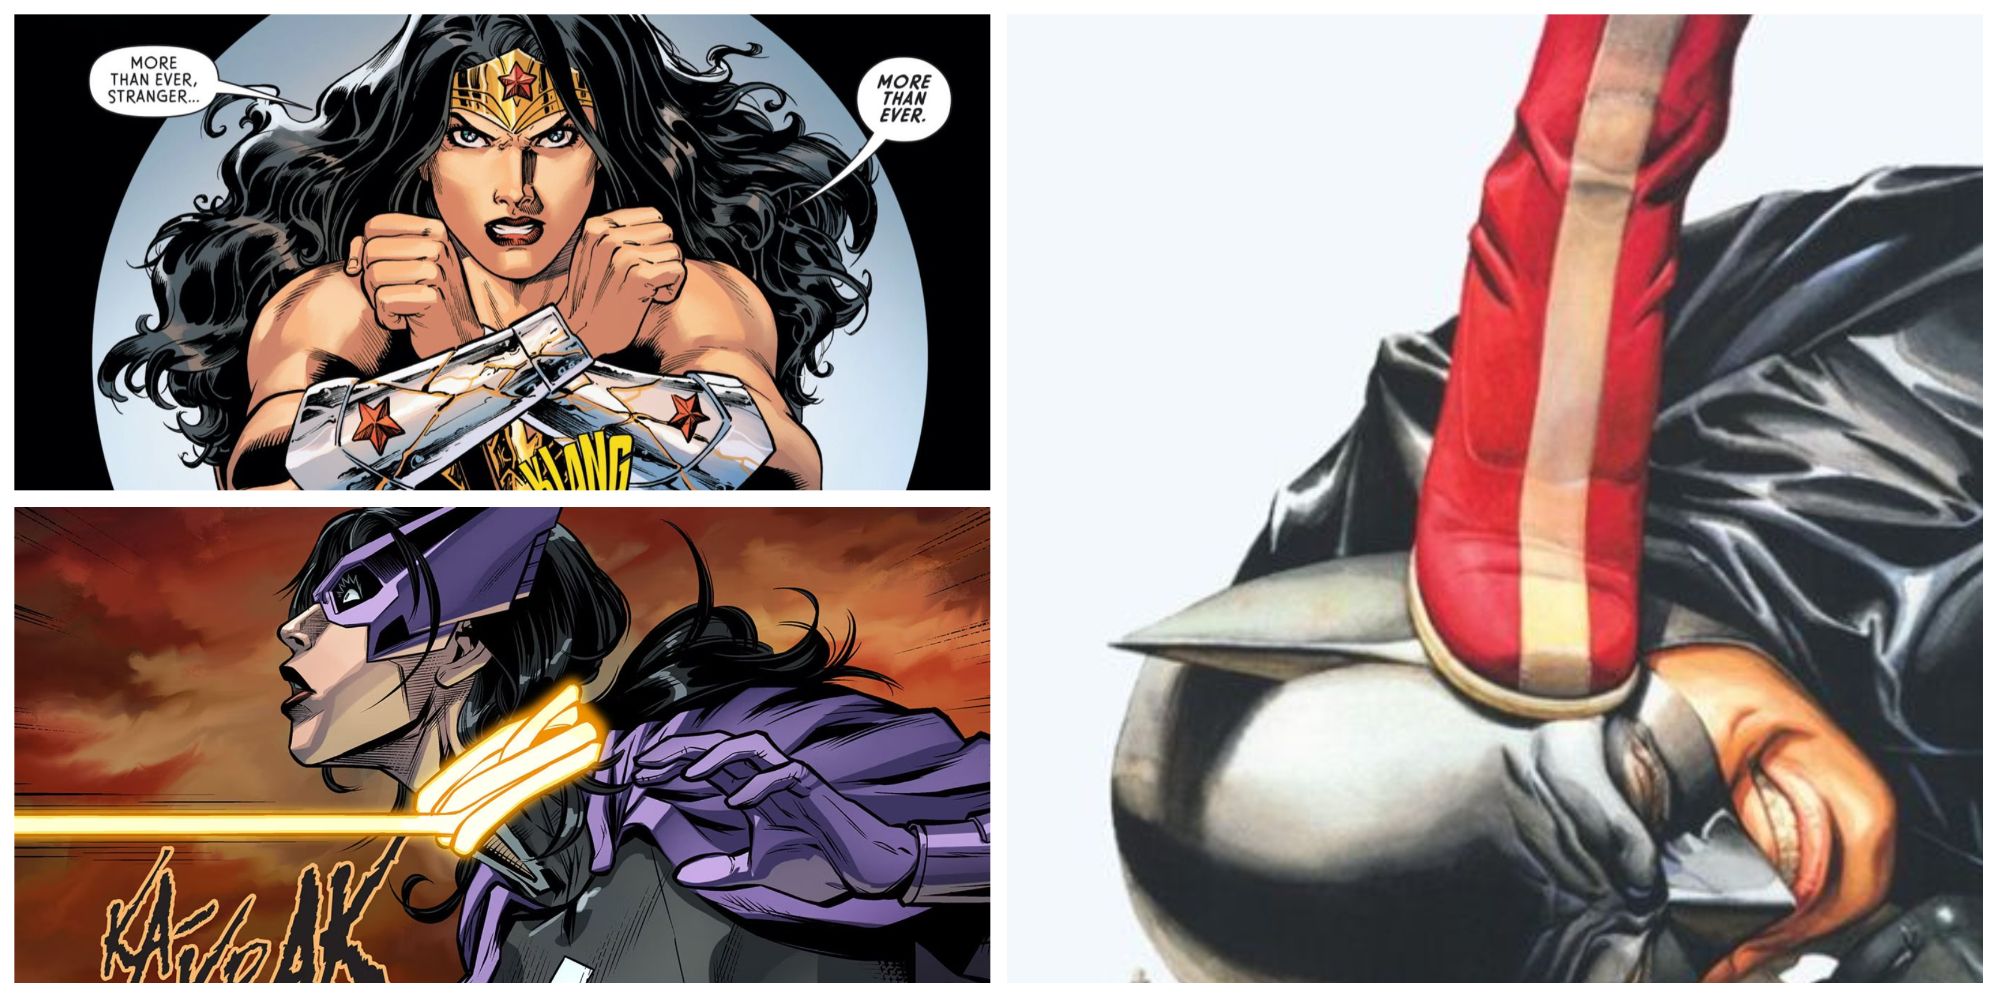 huntress, wonder woman and batman in a photo collage